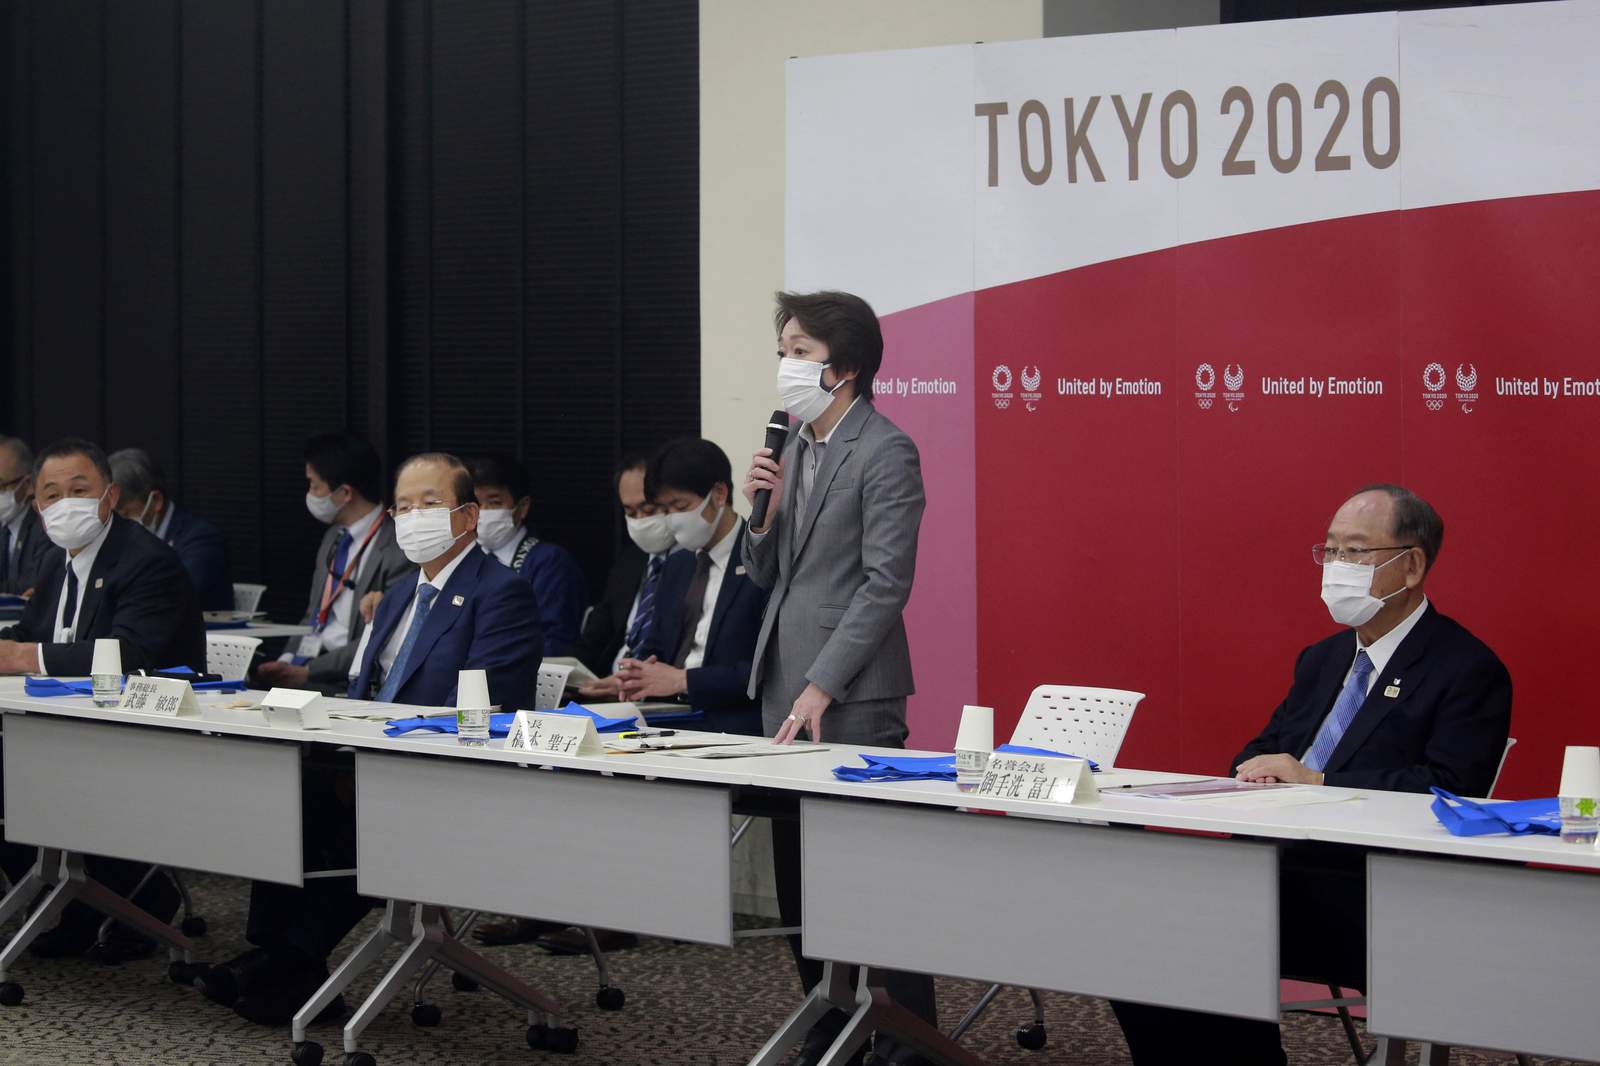 Tokyo Olympics add 12 women to executive board to reach 42%